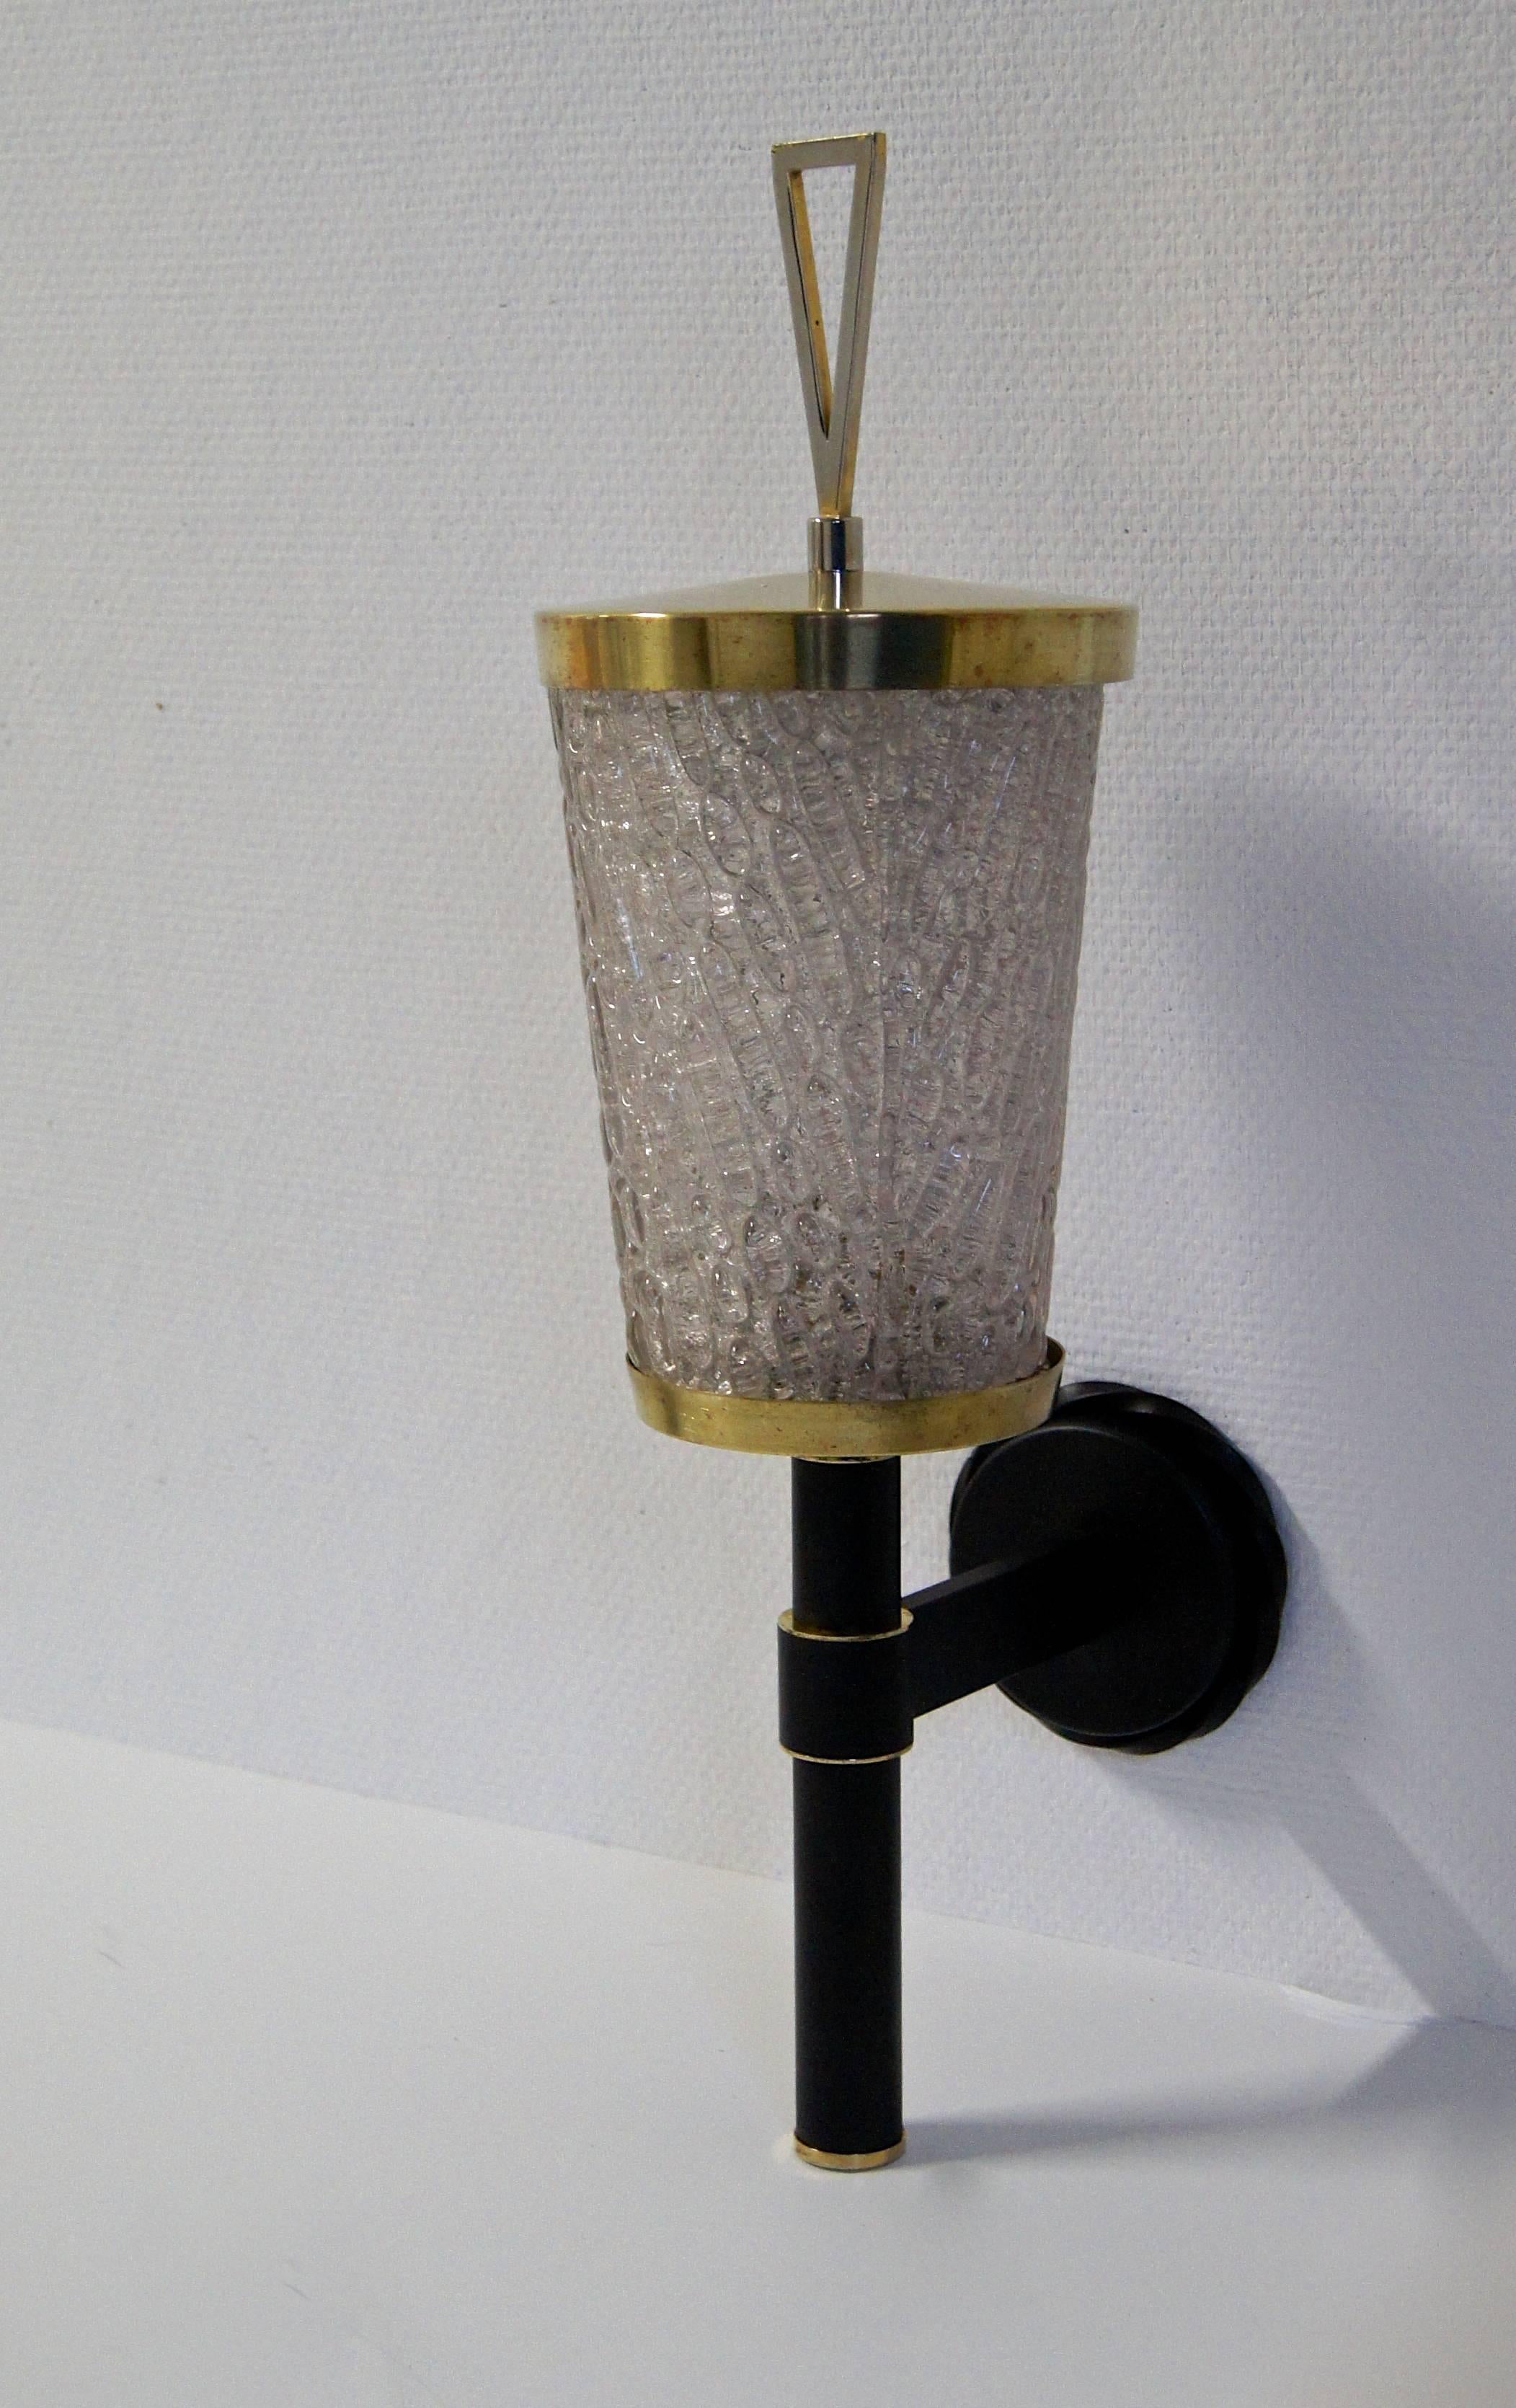 A Mid-Century French wall light with a very thick textured diffuser. The brass top has a modernist design. The black wall mount has brass details and has a high quality finish.